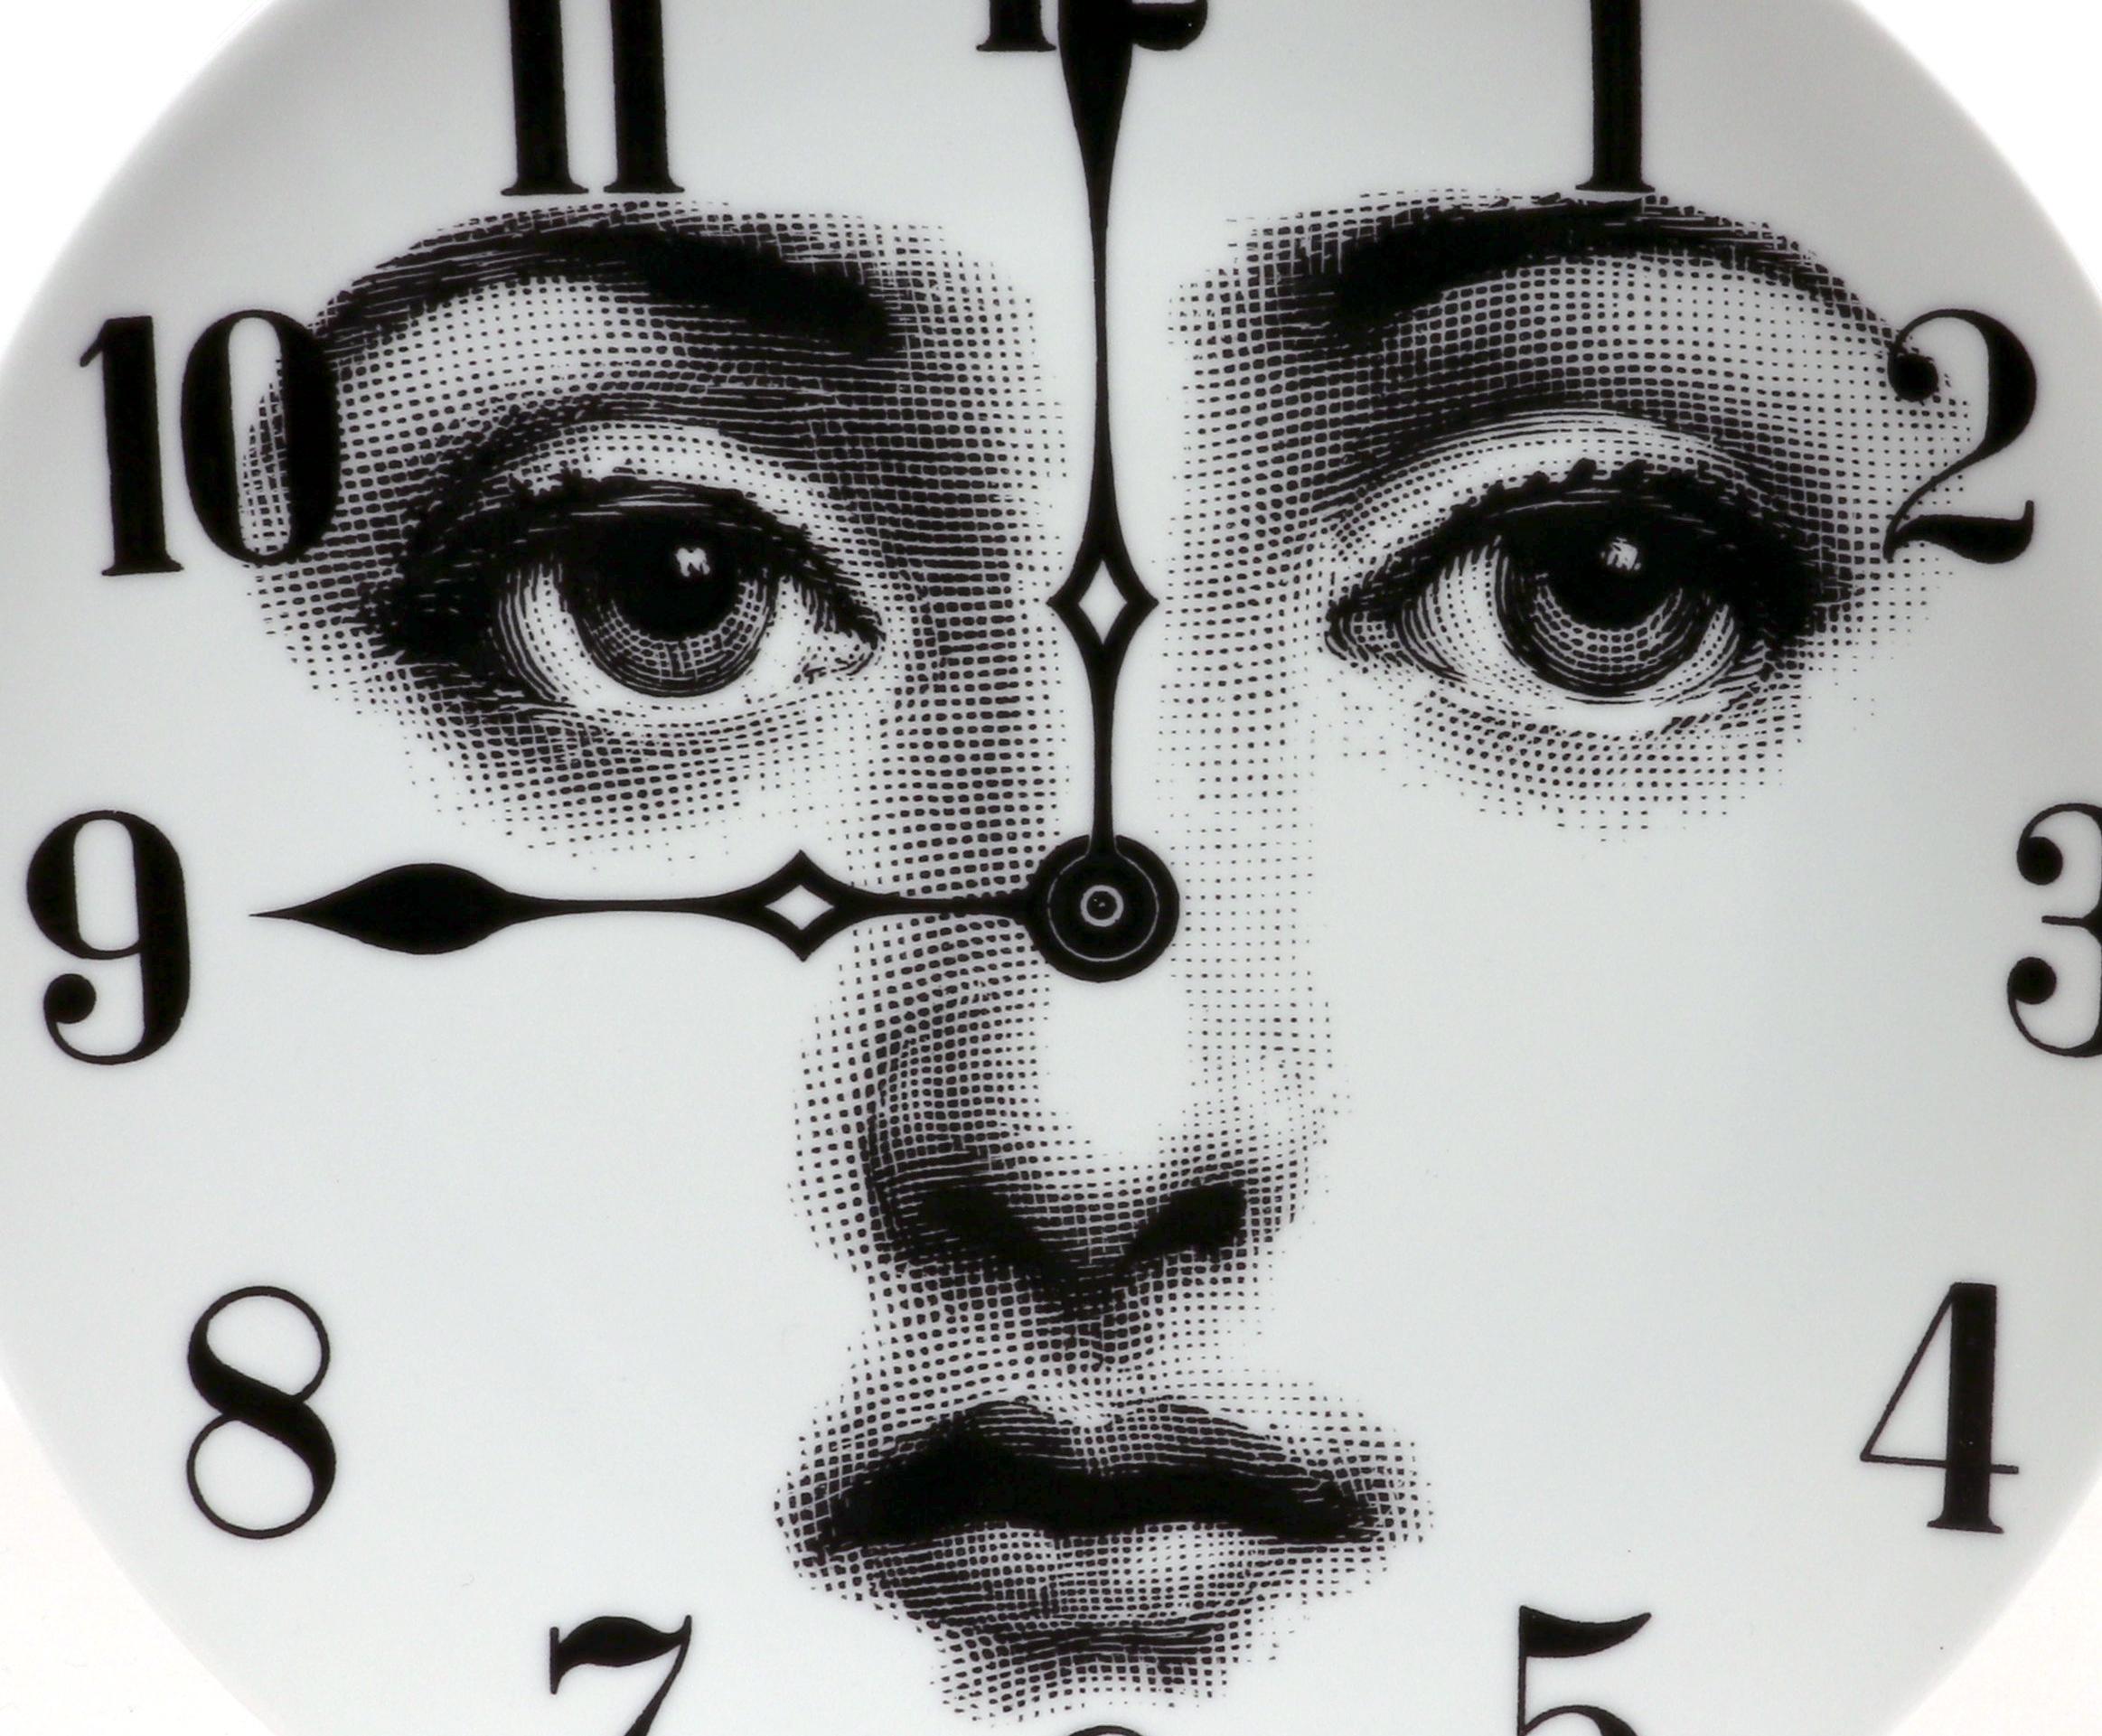 Vintage Fornasetti Porcelain Themes & Variation Plate #74
The Clock,
Atelier Fornasetti

The Surreal Fornasetti porcelain plate in the Themes & Variation pattern depicts the face of Lina Cavalieri, Piero Fornasetti's muse as a